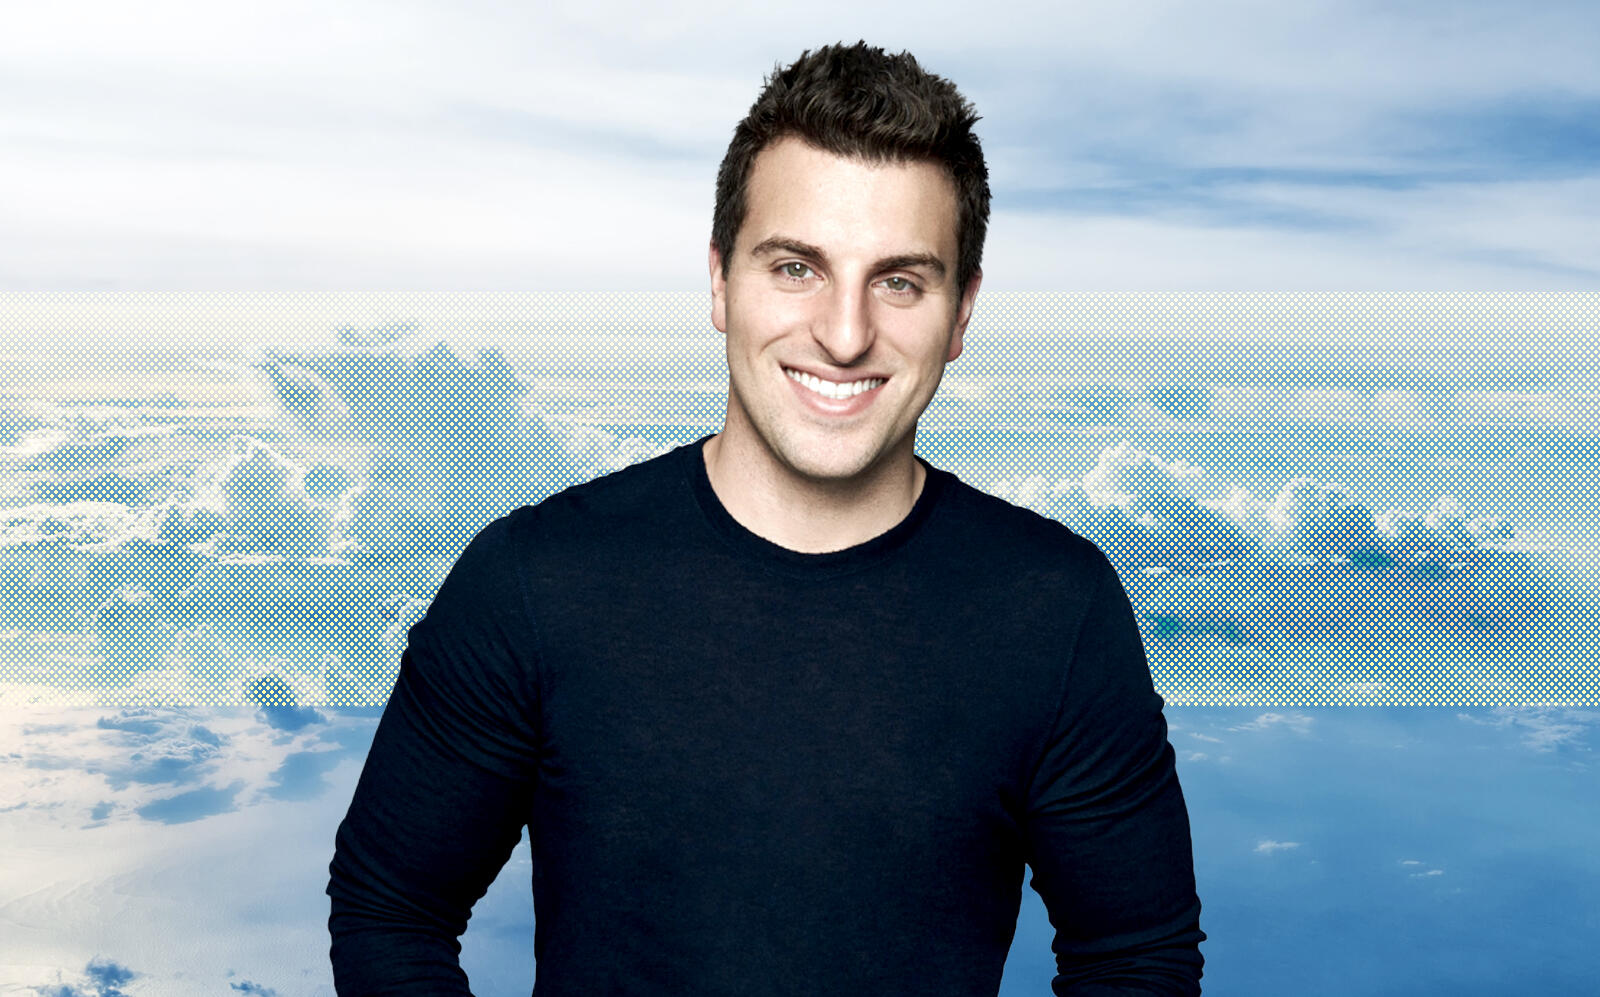 Airbnb CEO Brian Chesky. (Airbnb, Getty)